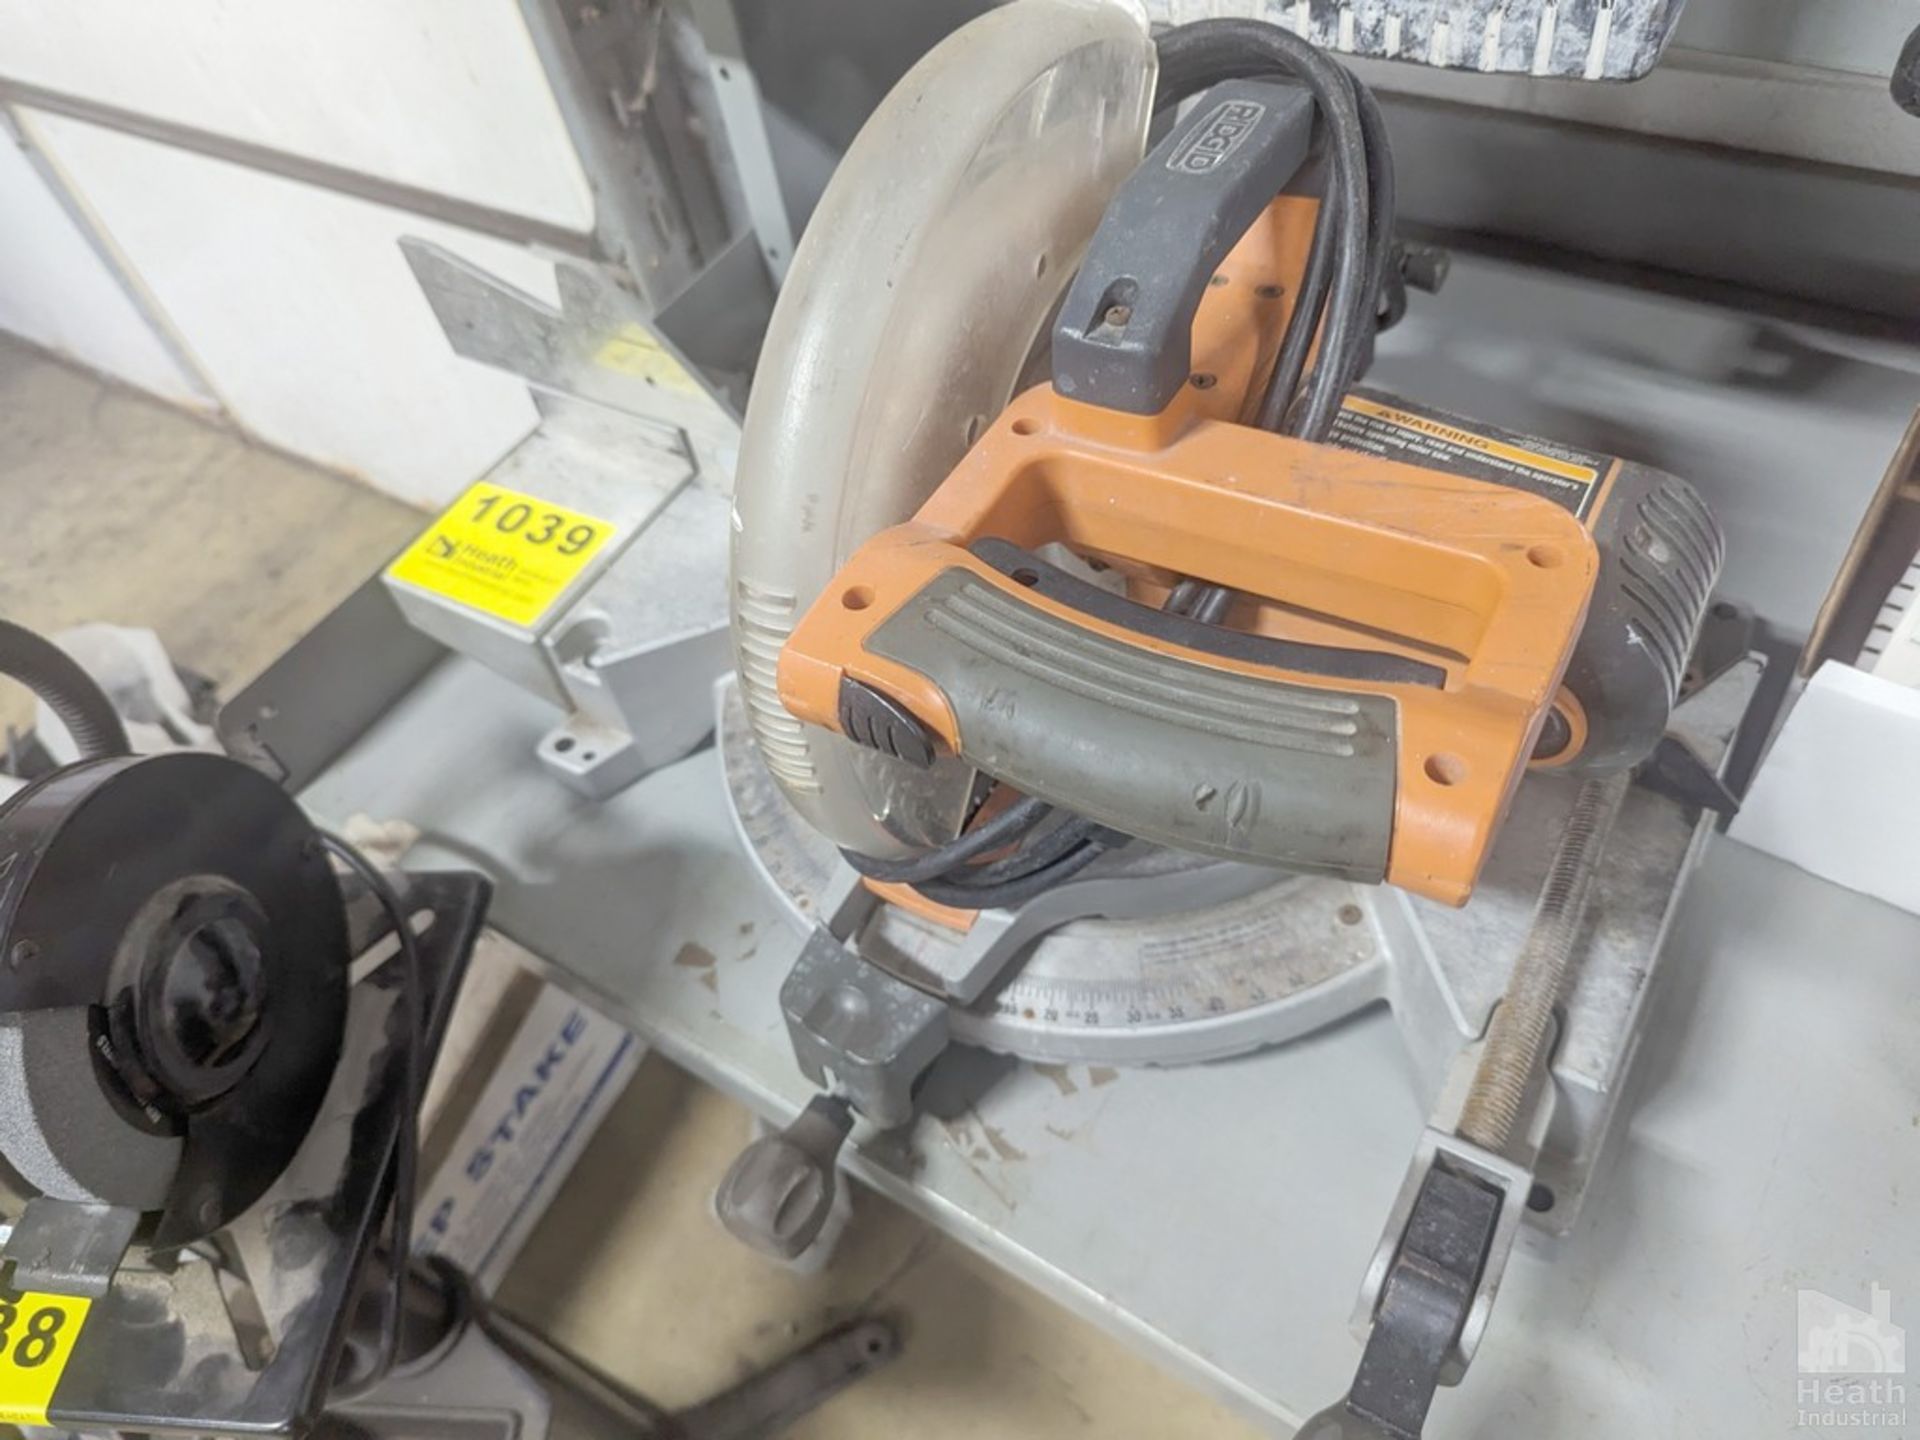 RIDGID 10" MITER SAW WITH LASER CUTTING GUIDE - Image 2 of 2